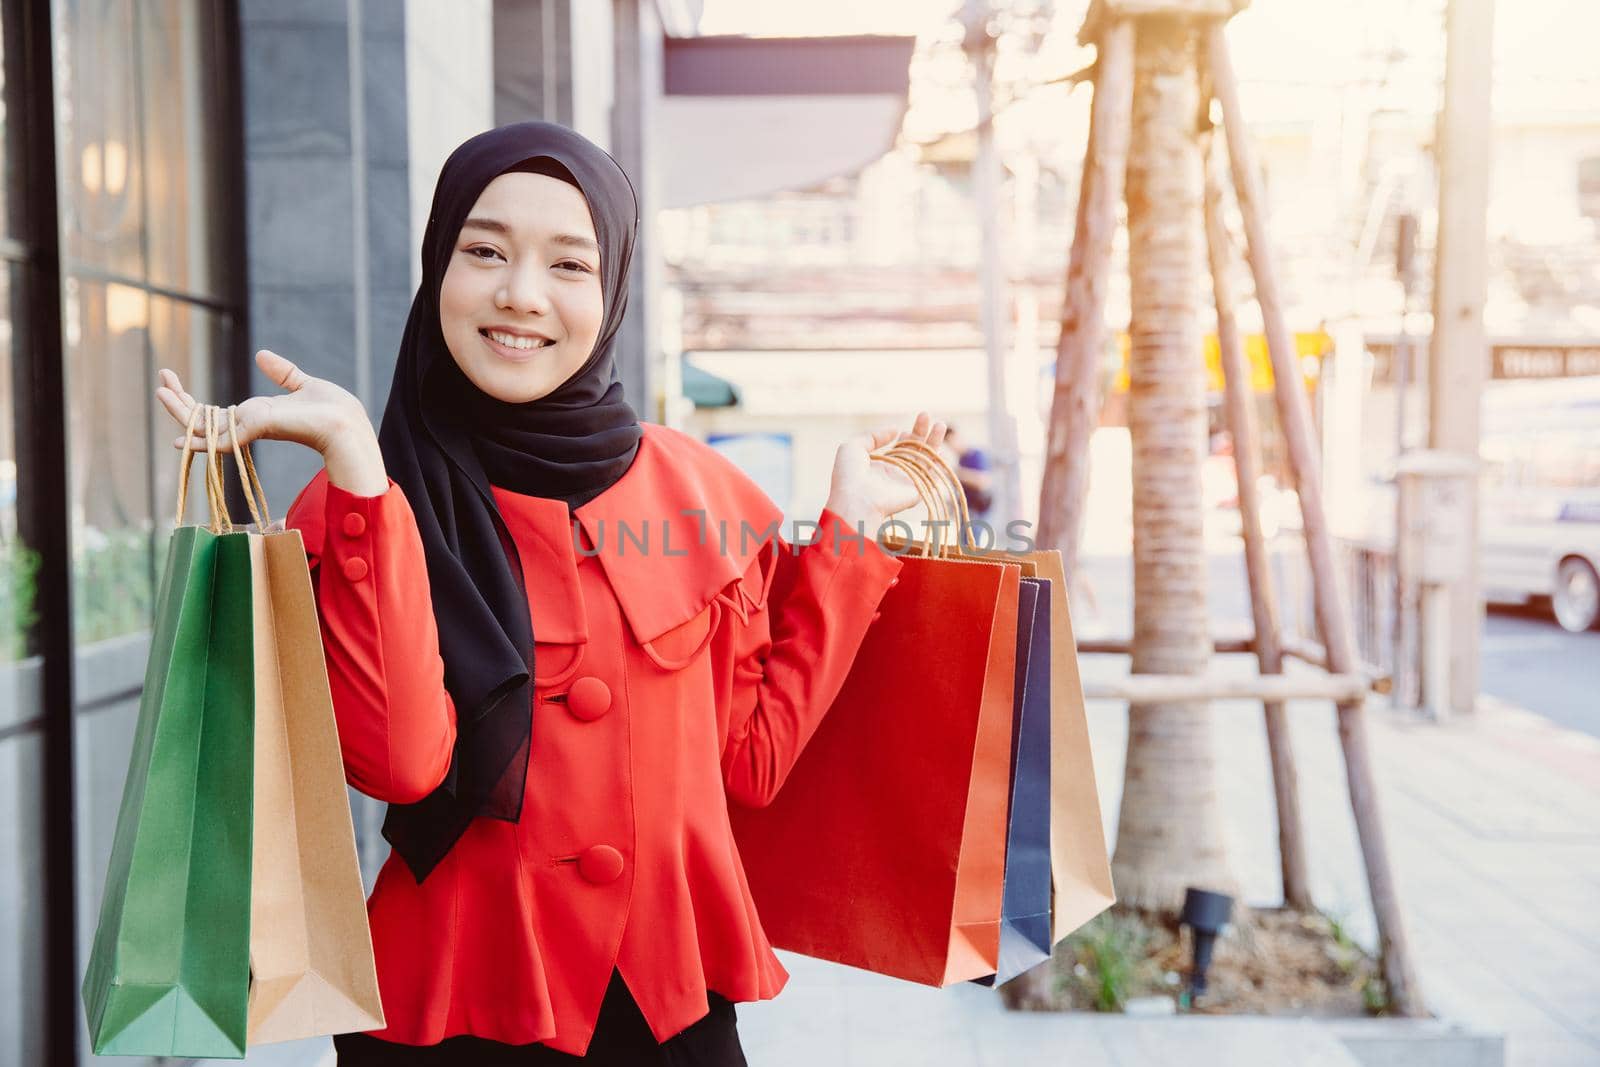 Arab Muslim young woman in veil hijab clothes holding shopping bags at city metro walking street. by qualitystocks